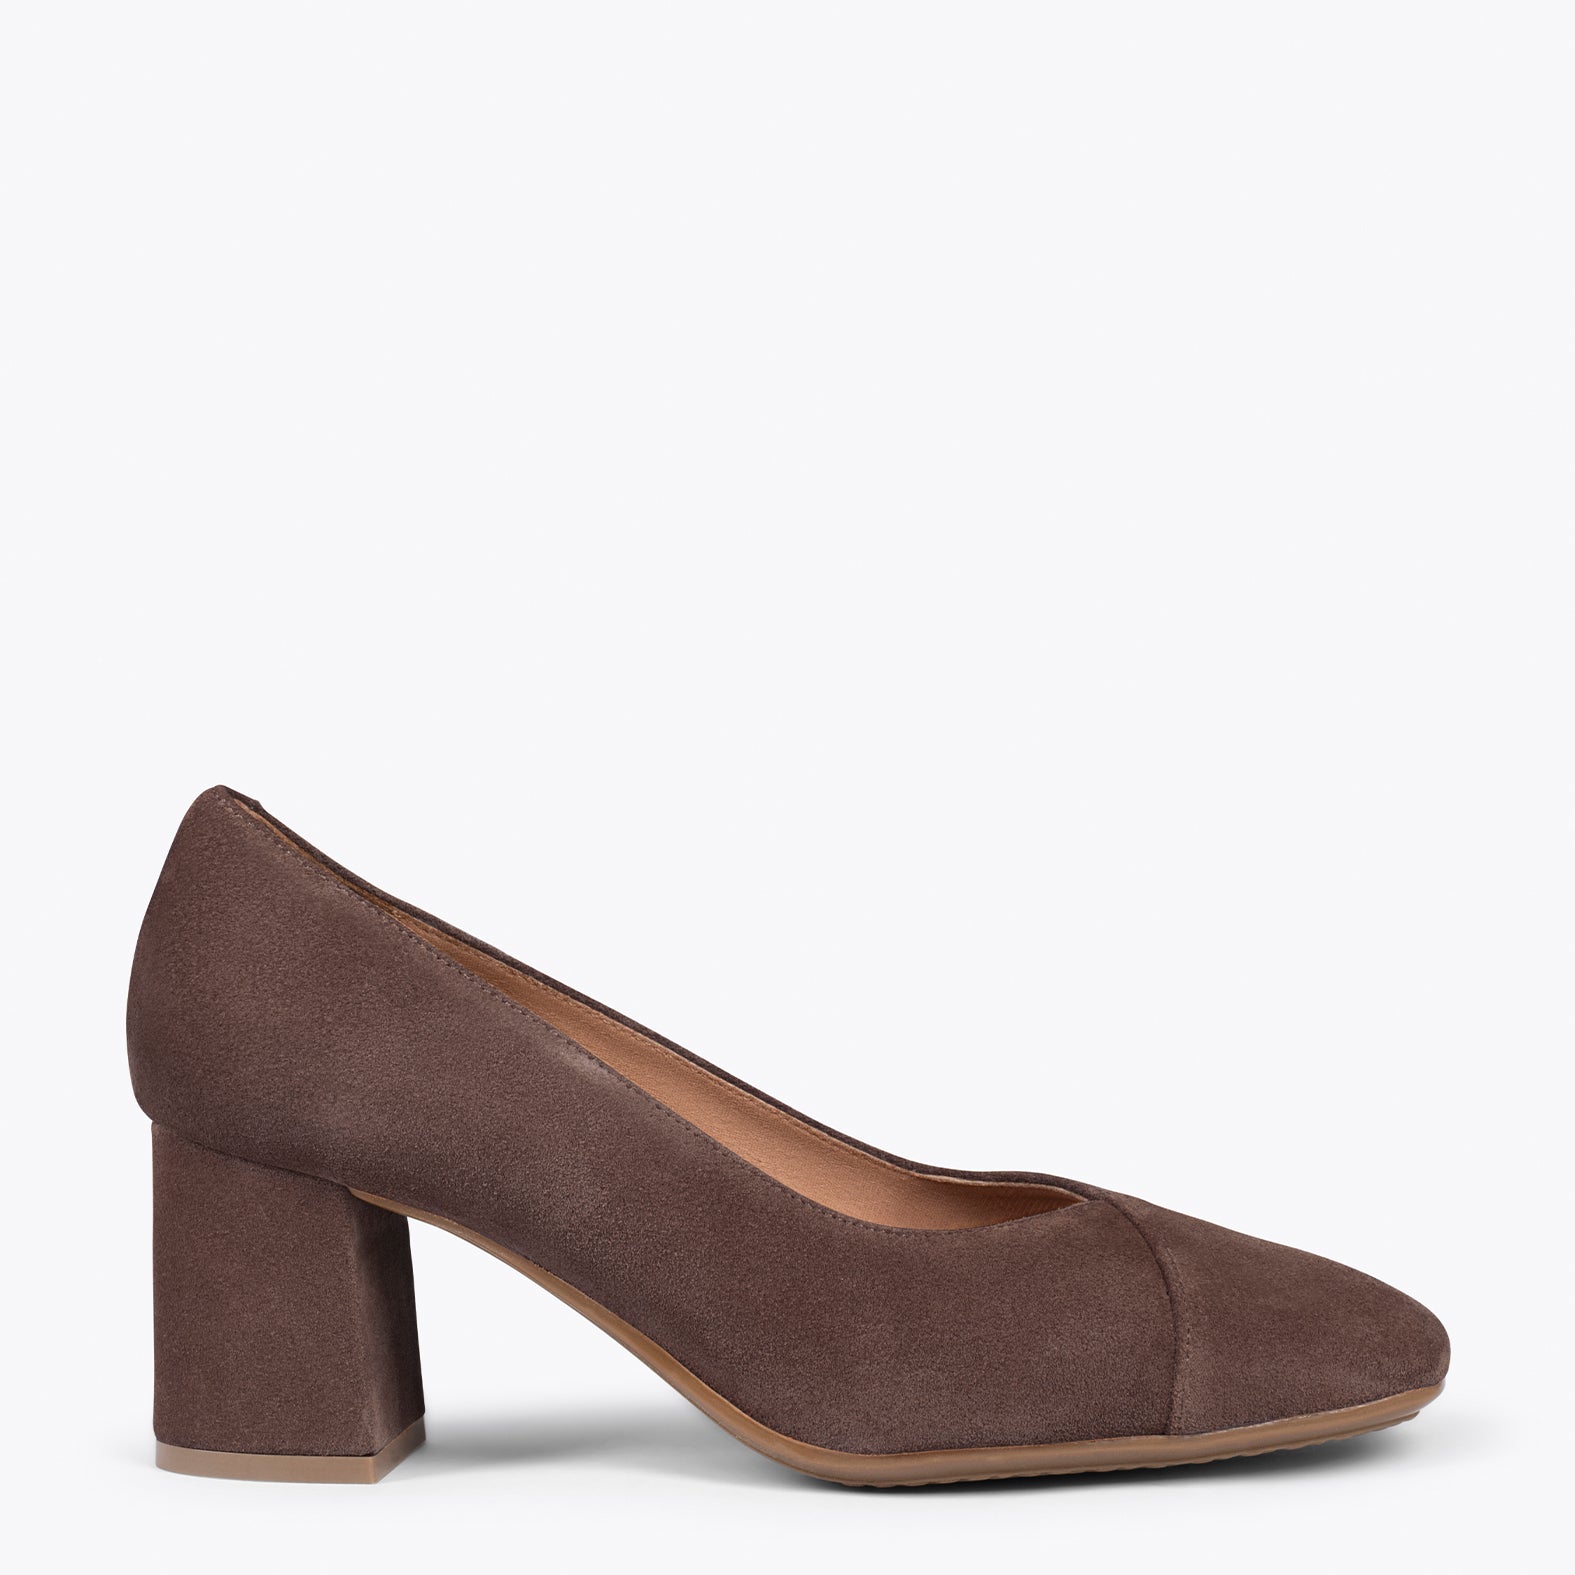 EMMA – BROWN high heels with square toe